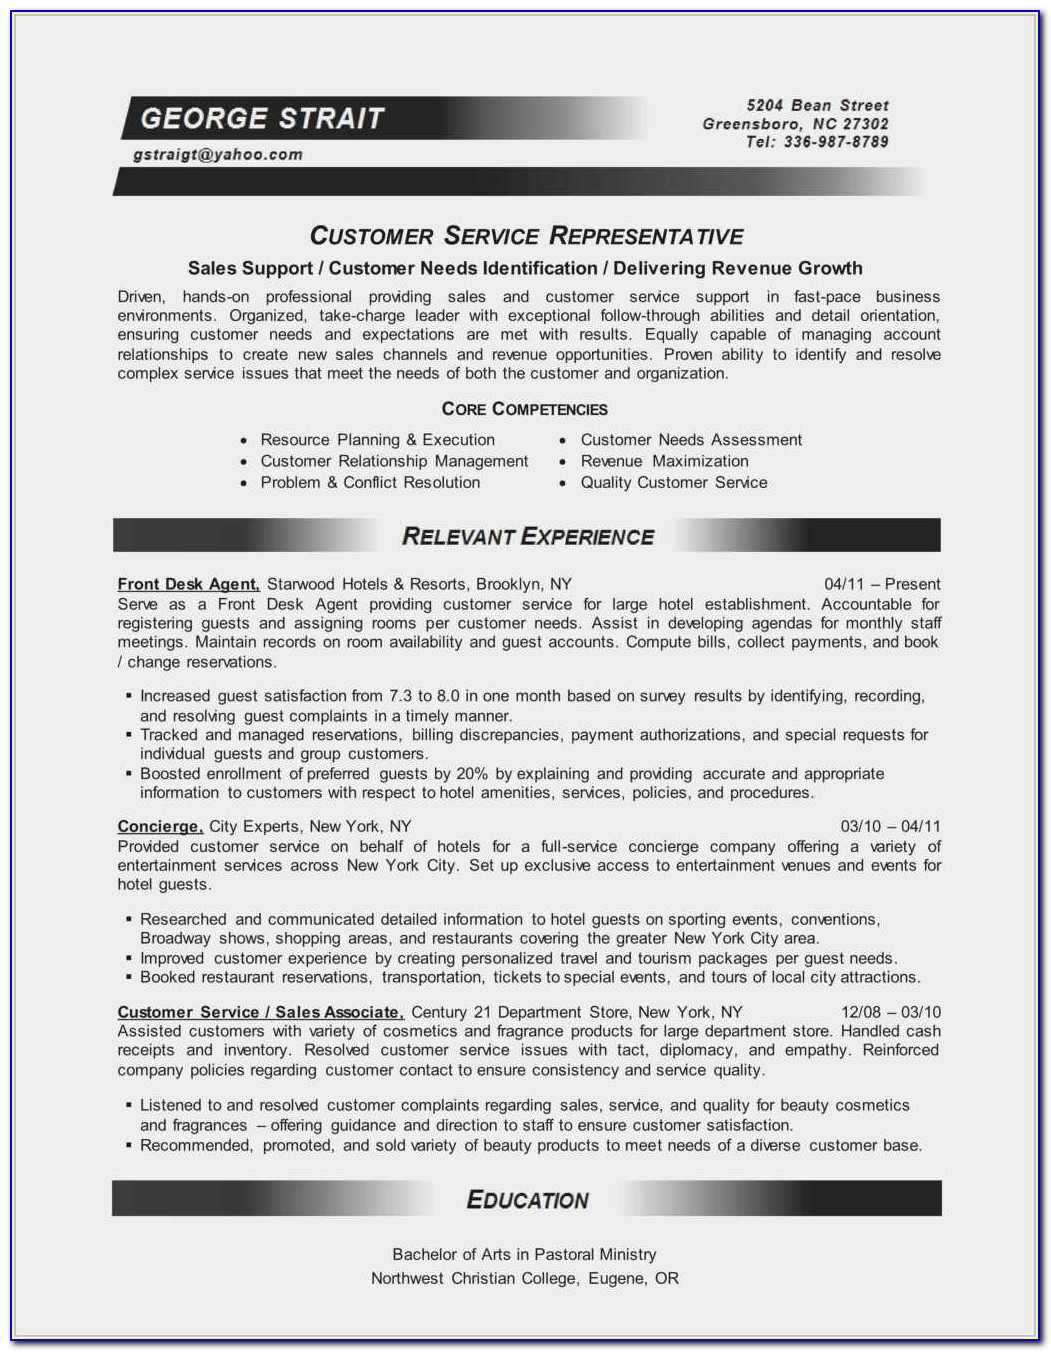 Federal Resume Writing Services Reddit